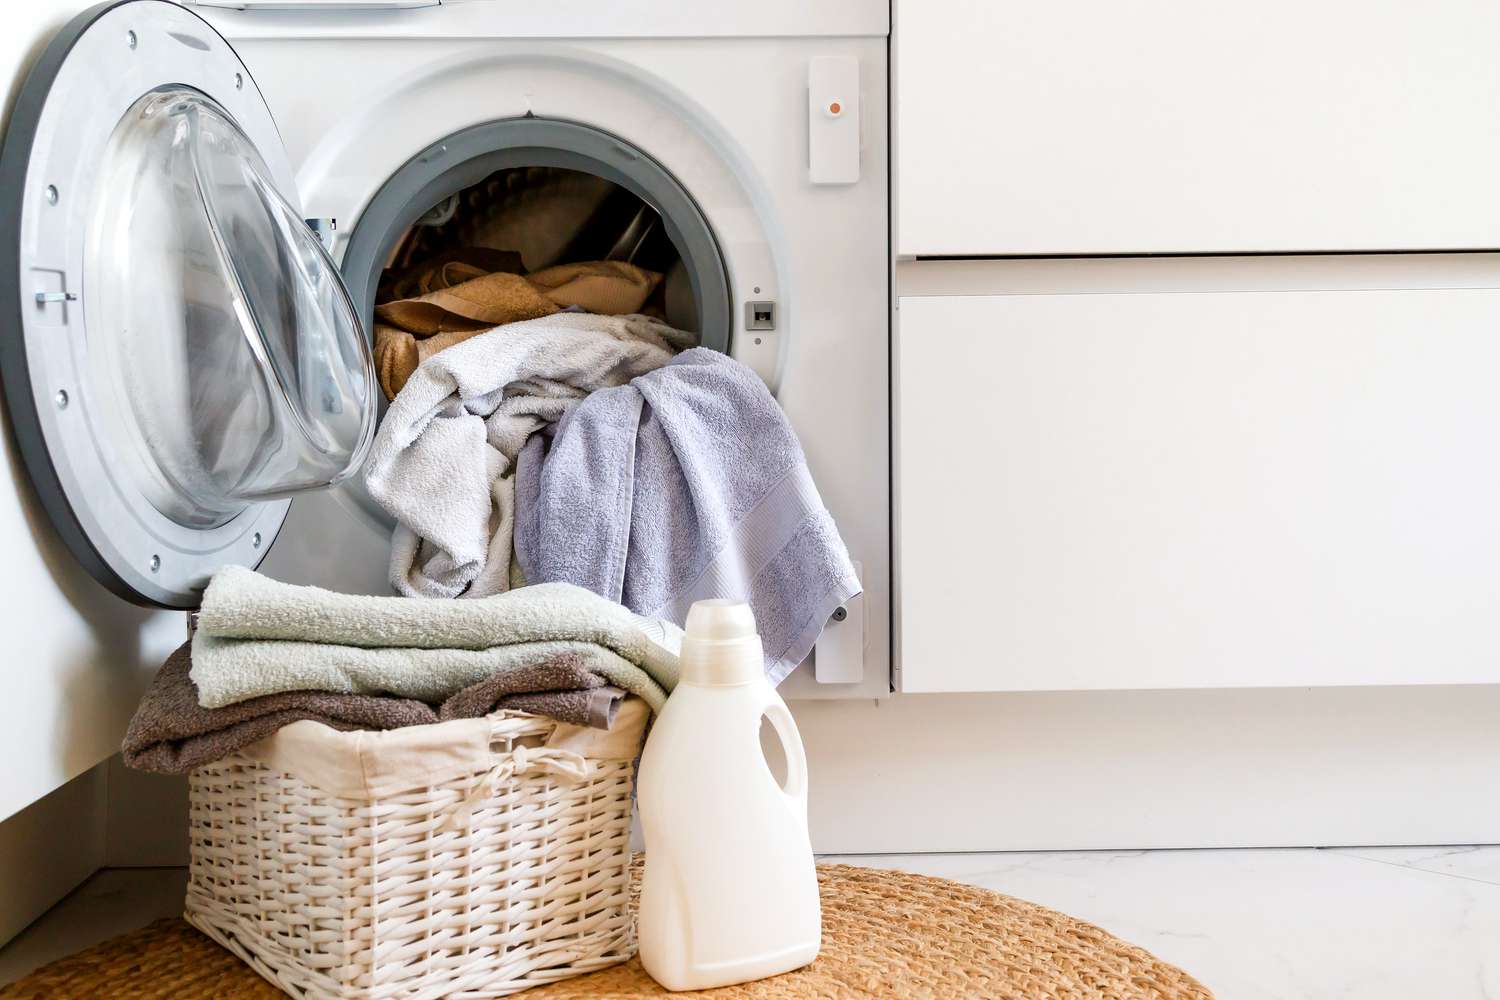 Can You Dry Whites and Colors Together? Tips for Safe and Efficient Laundry Practices